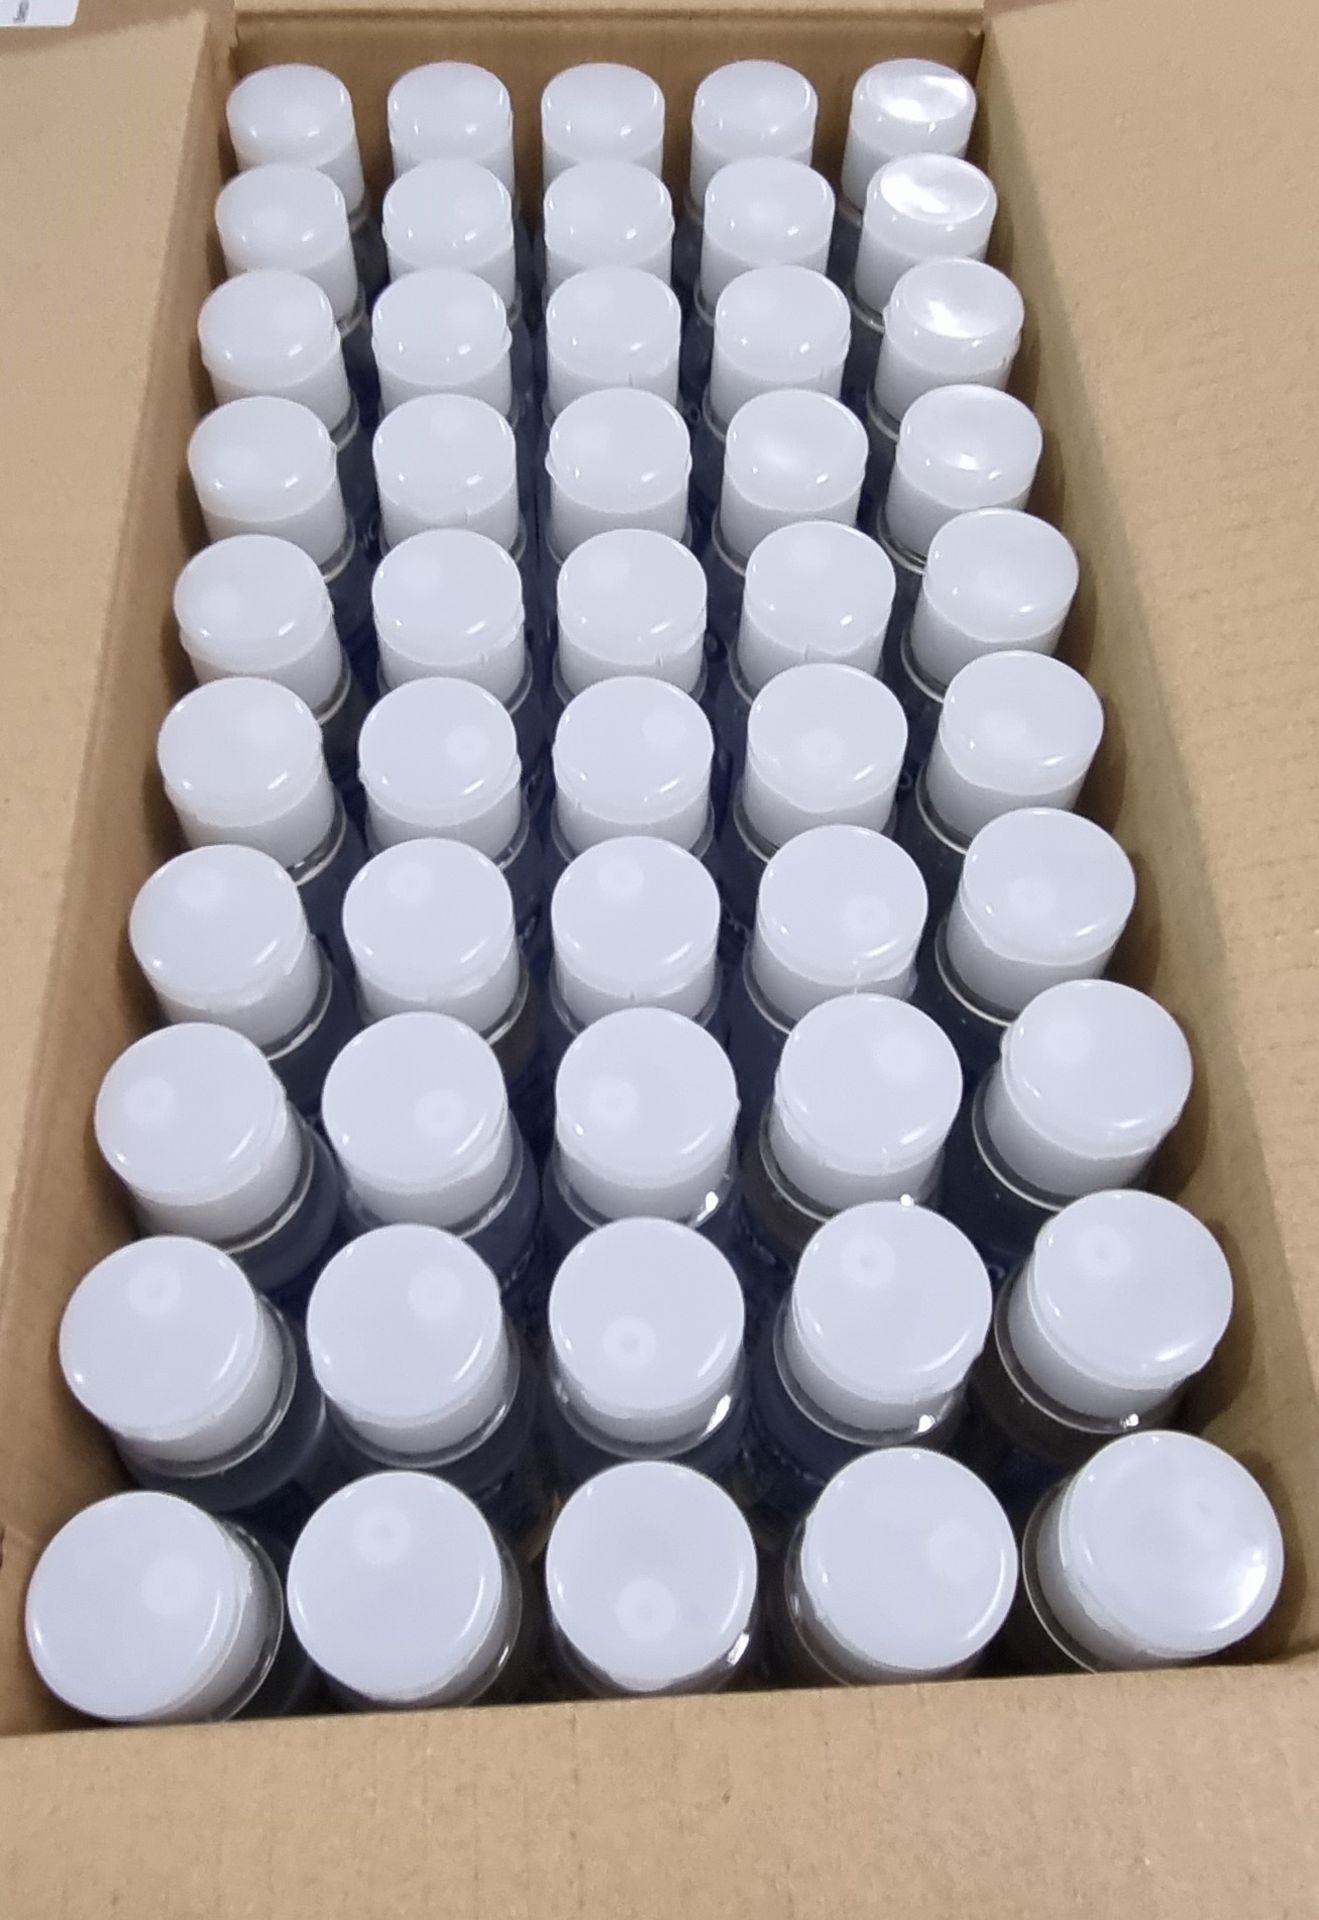 1 x Pallet of Sanione Hand Sanitizer Approx 50 Boxes See Photos - Image 4 of 5